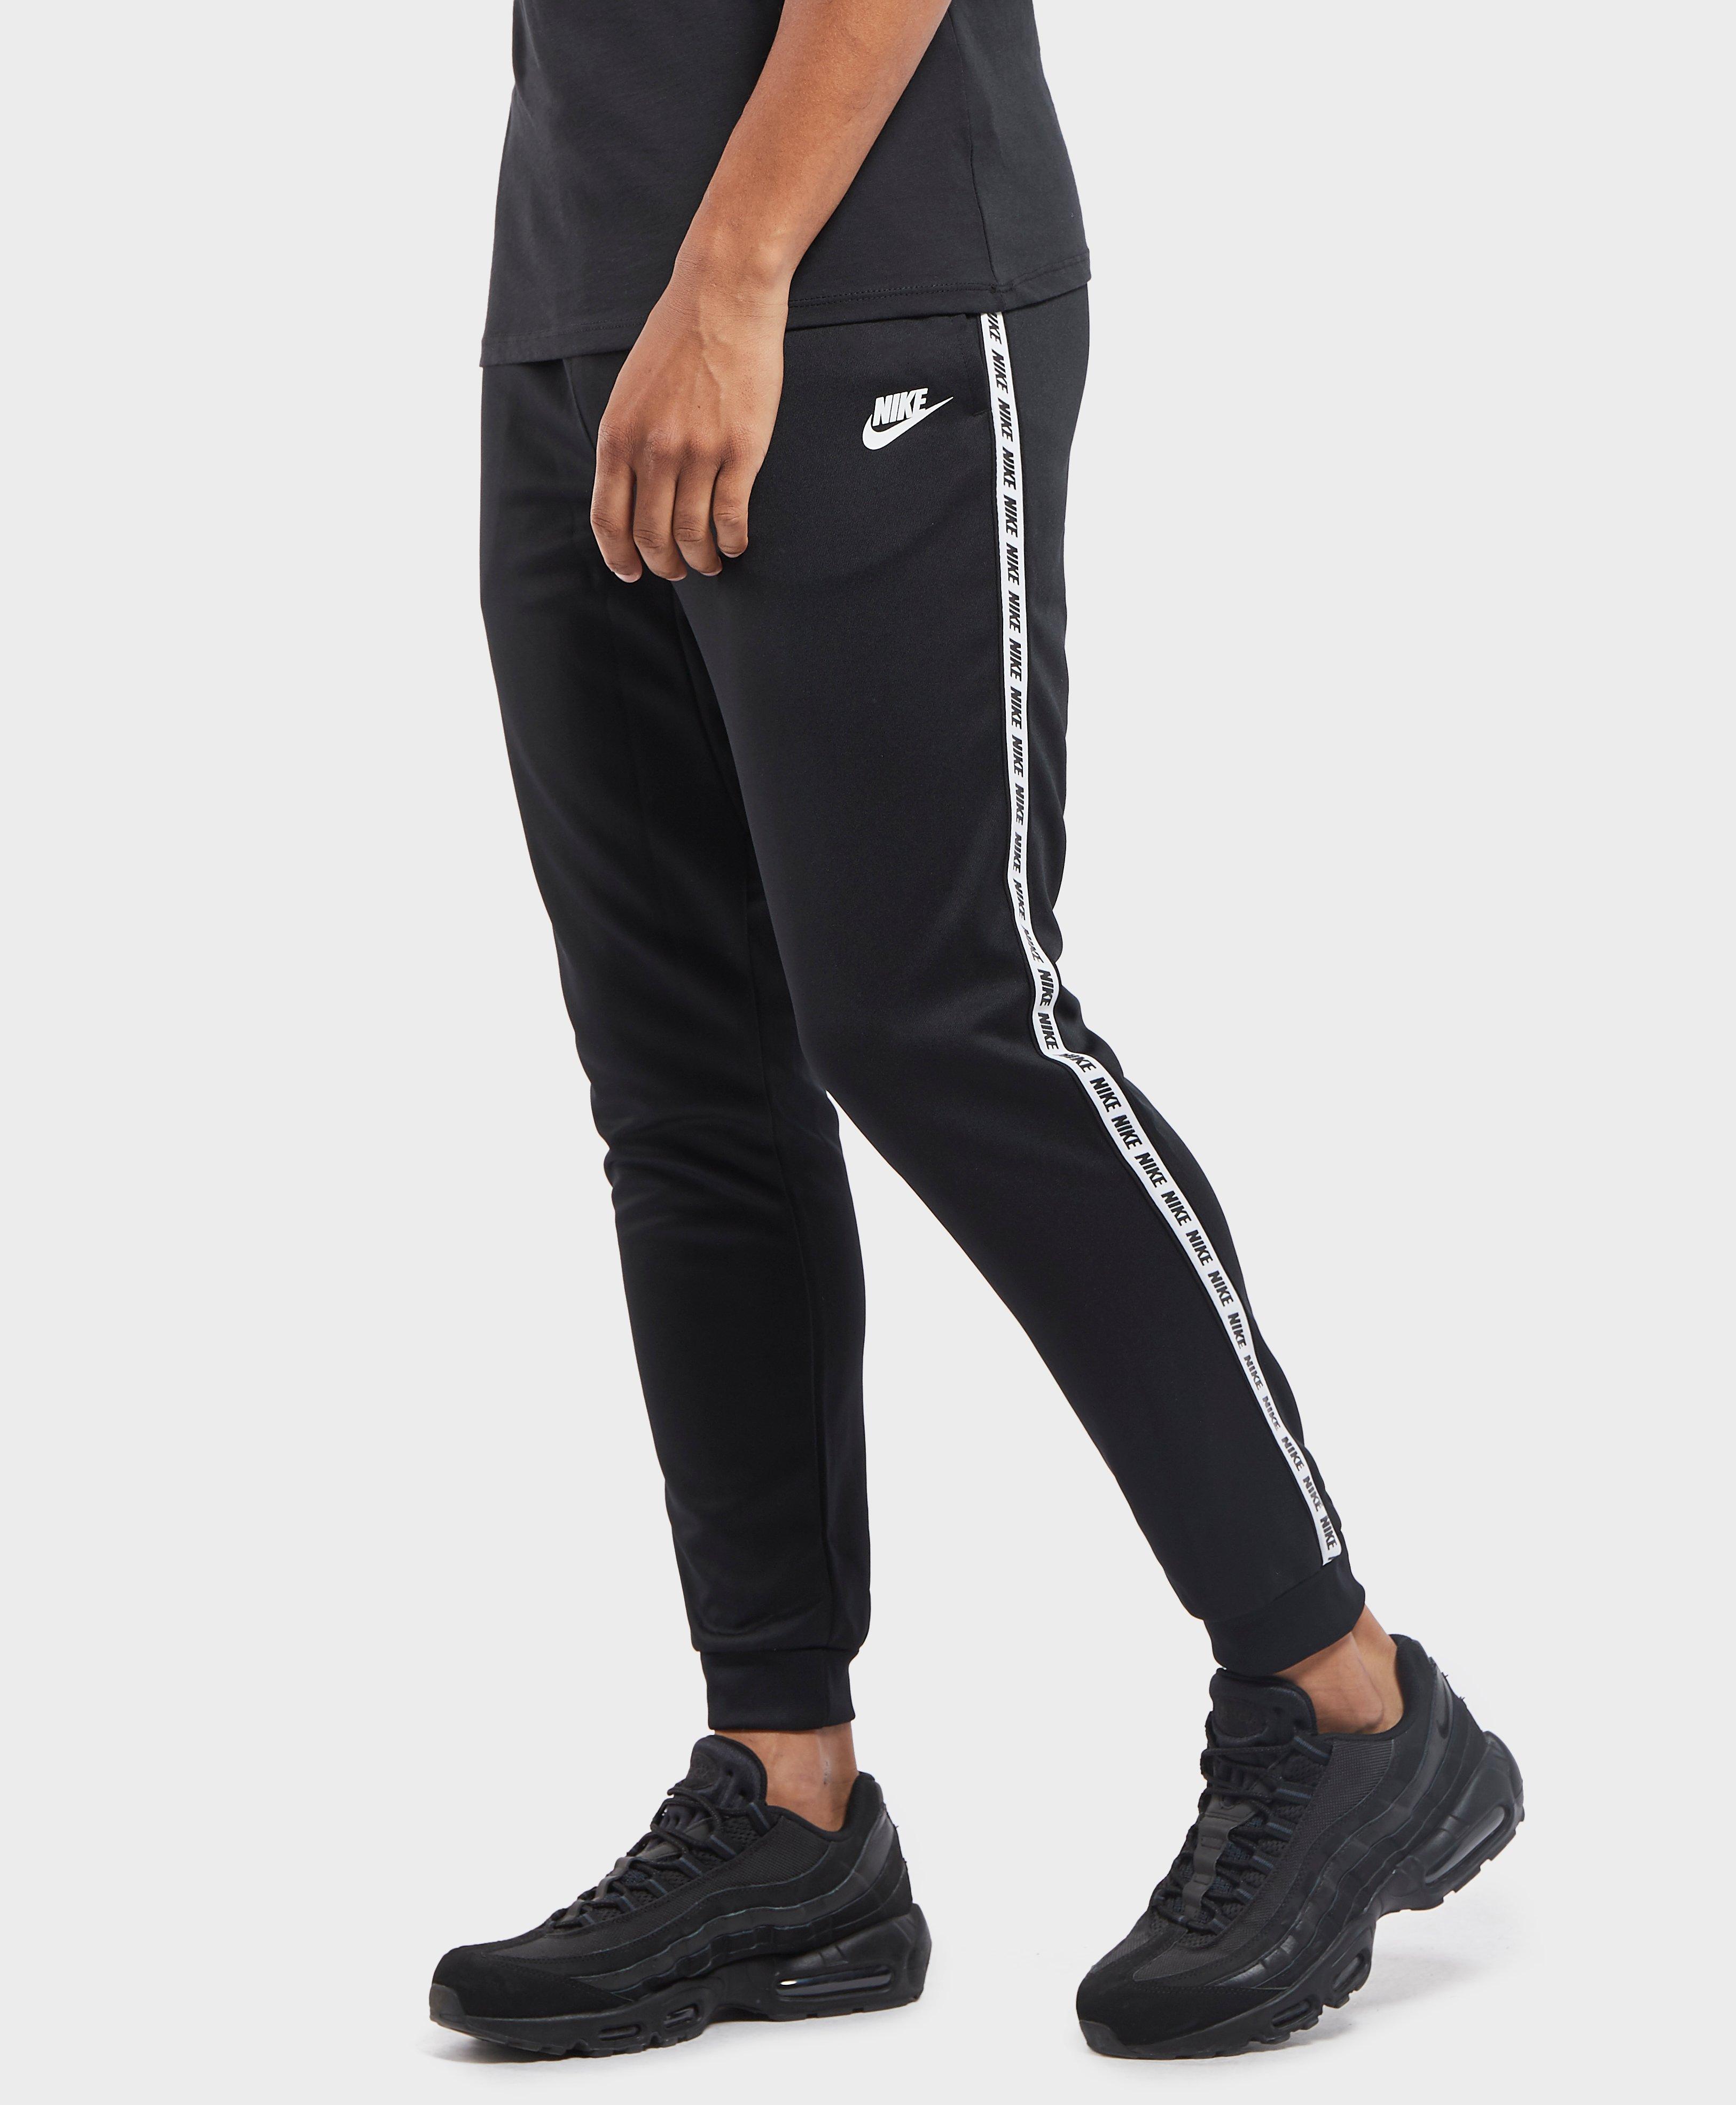 Nike Synthetic Gel Tape Cuffed Track Pants in Black/White (Black) for ...